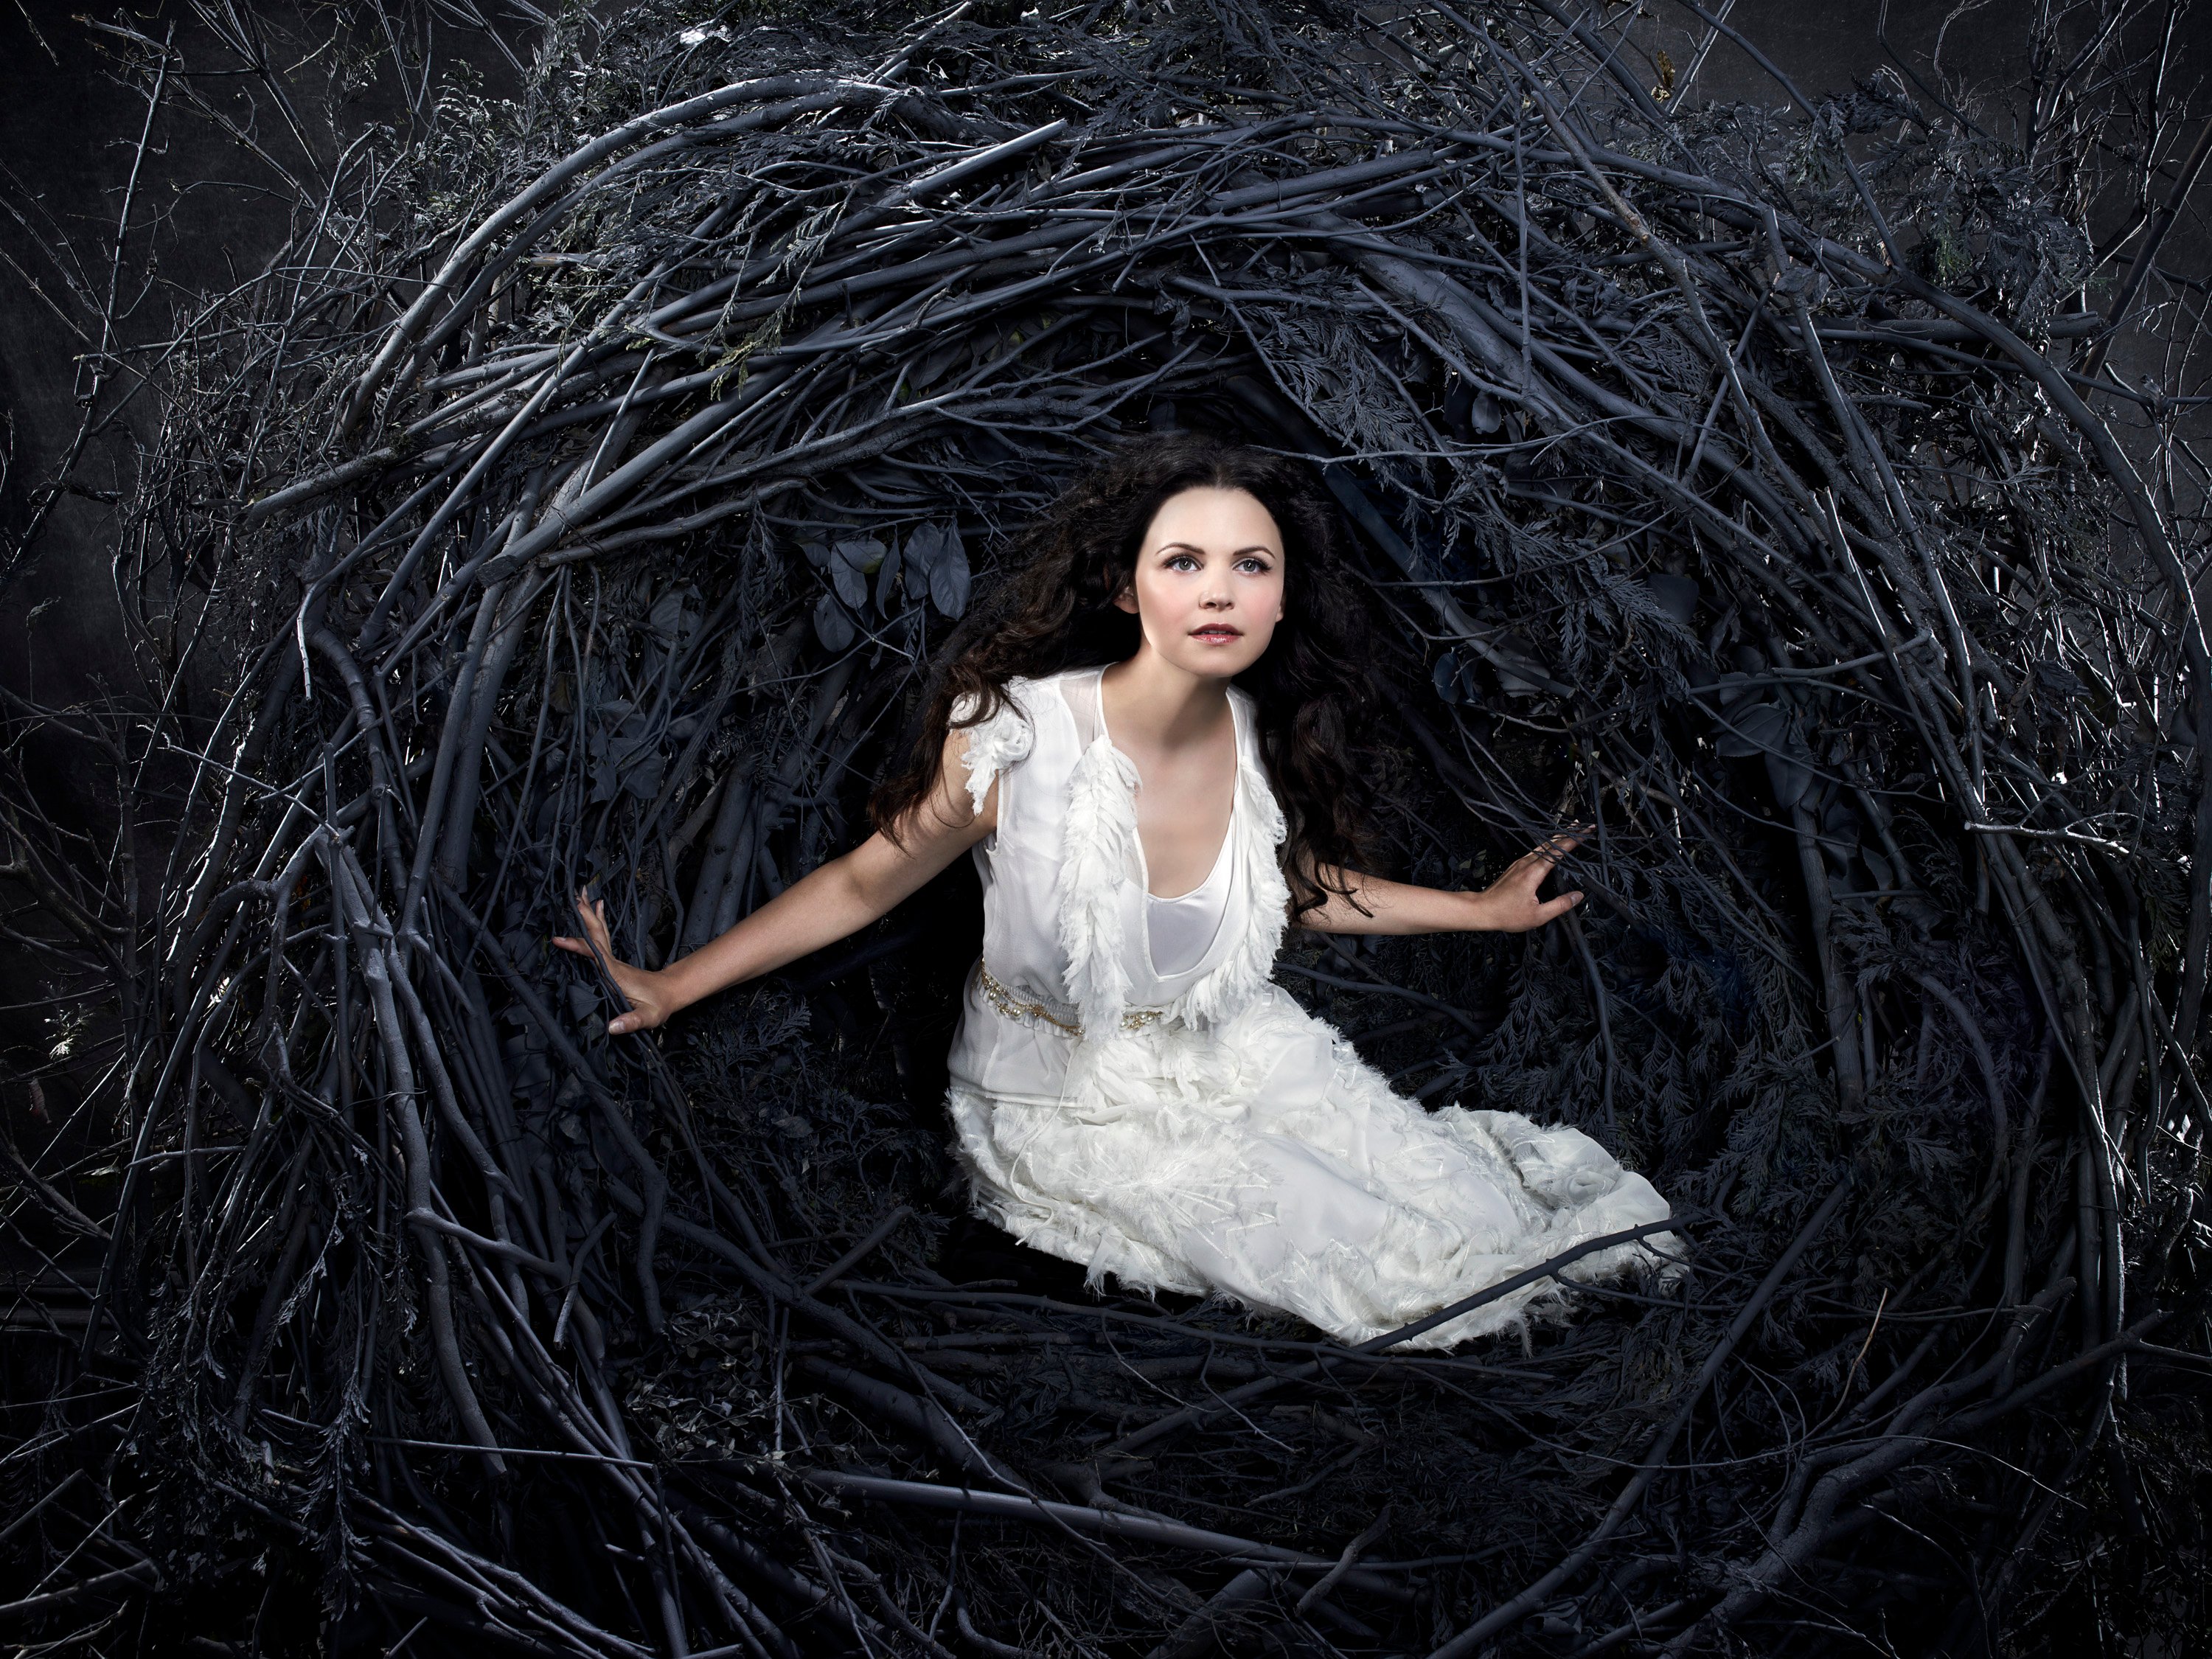 'Once Upon a Time' stars Ginnifer Goodwin as Snow White/Mary Margaret